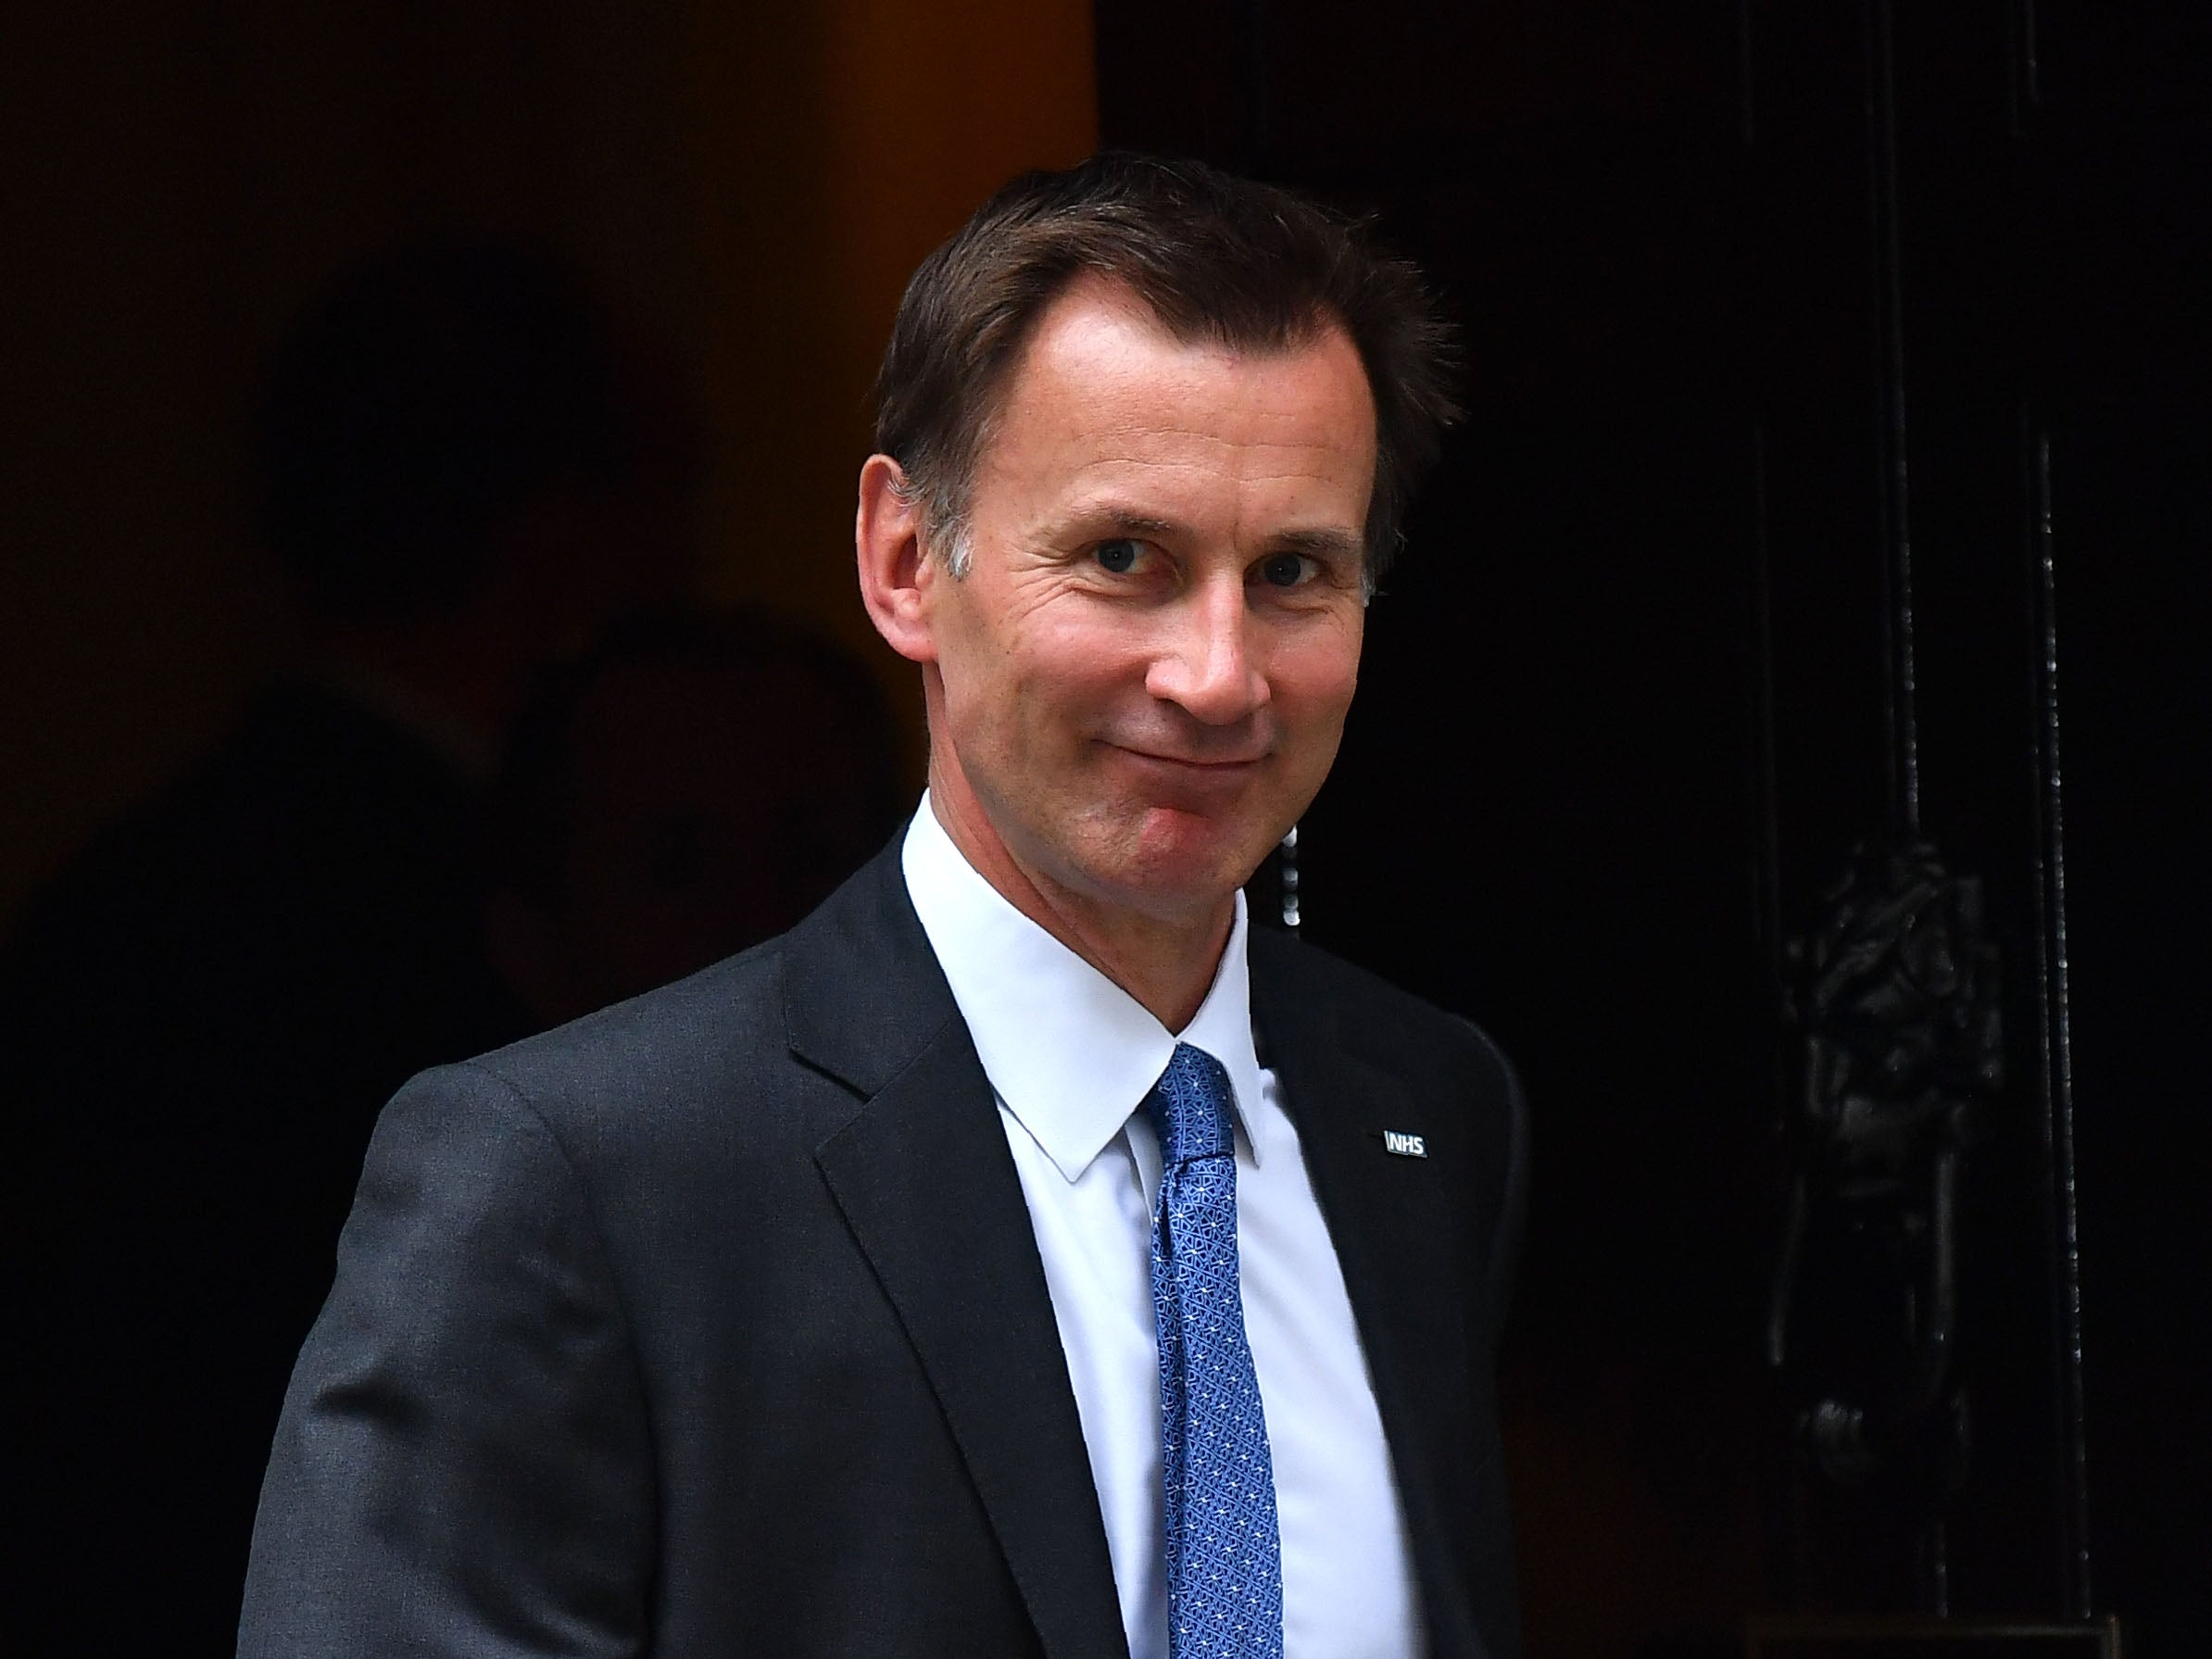 Jeremy Hunt leaves 10 Downing street after a cabinet meeting on 11 July